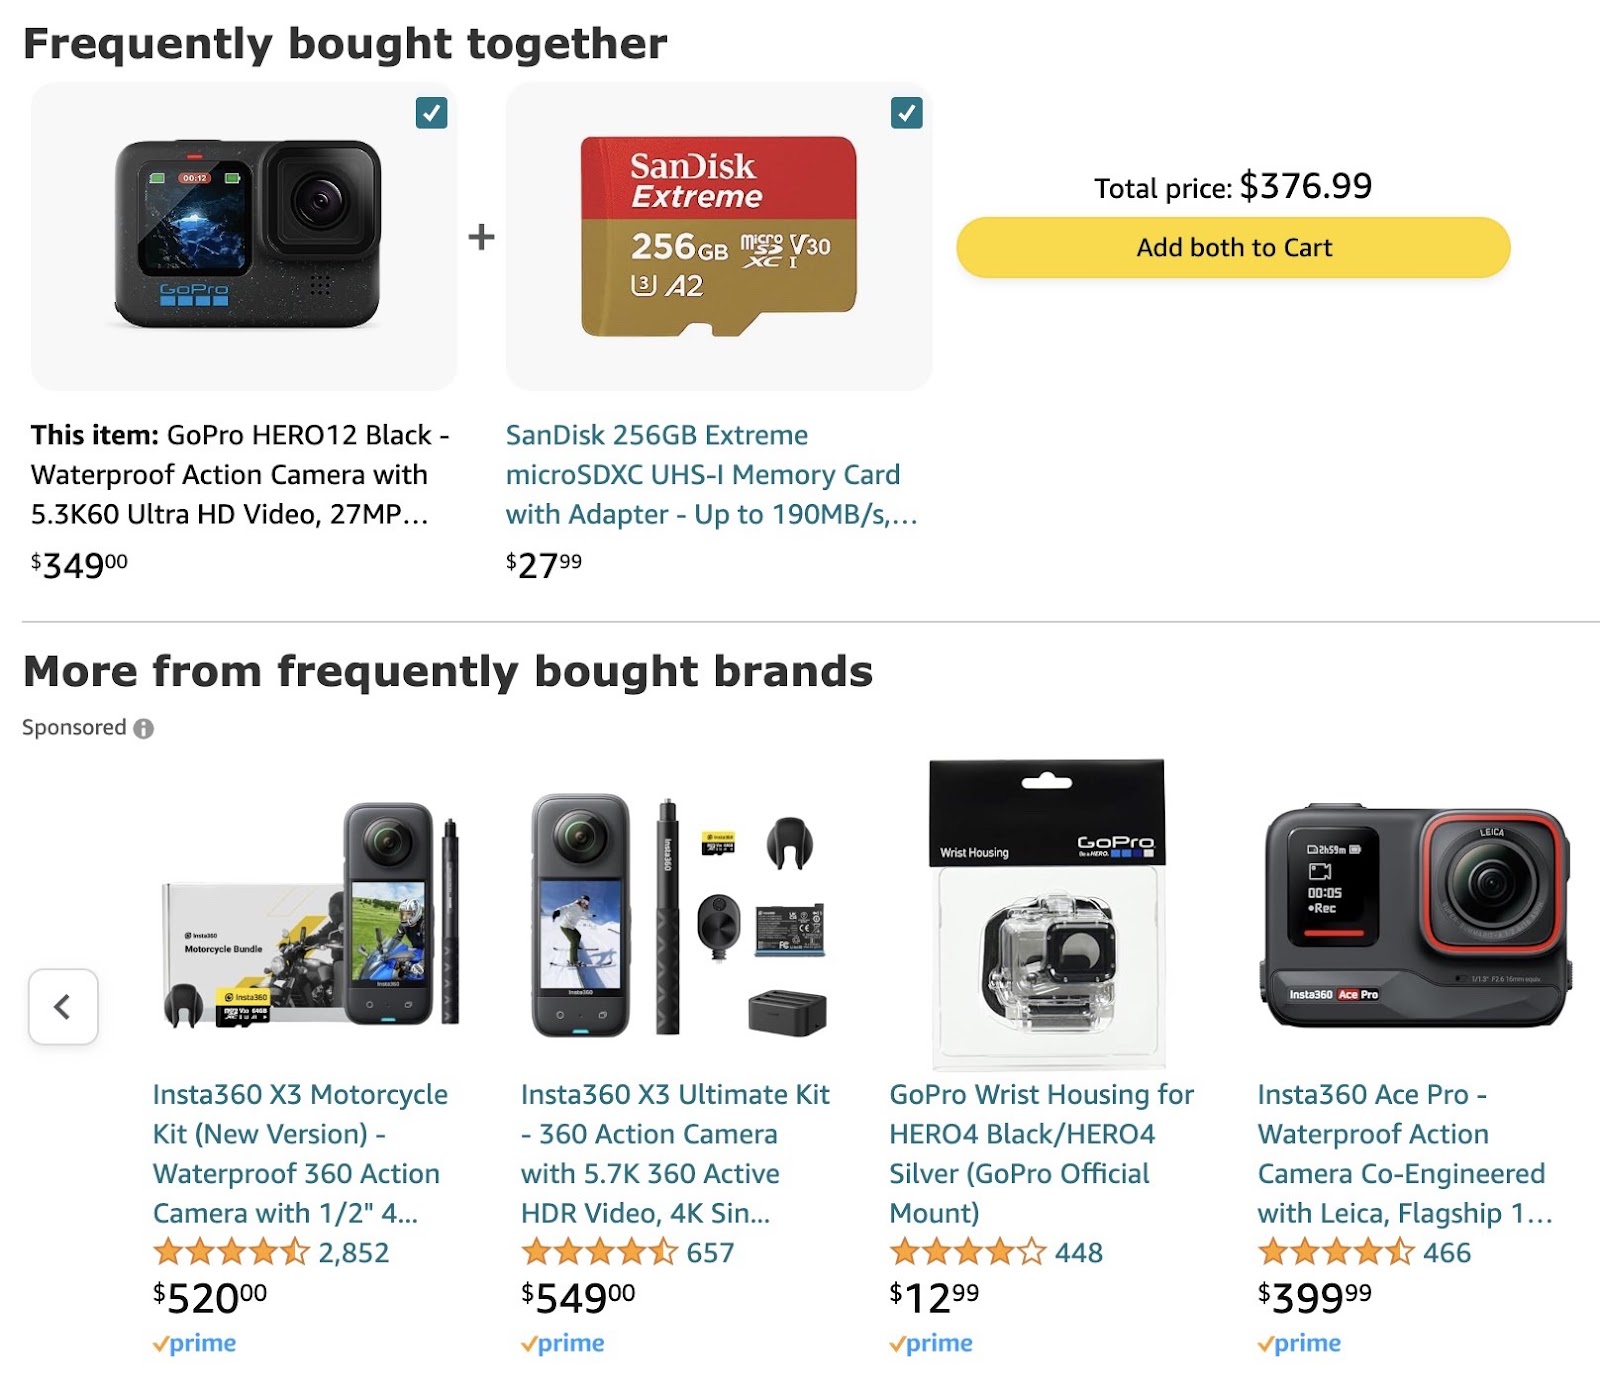 Amazon's recommendation system showing items frequently bought with a "GoPro" camera.